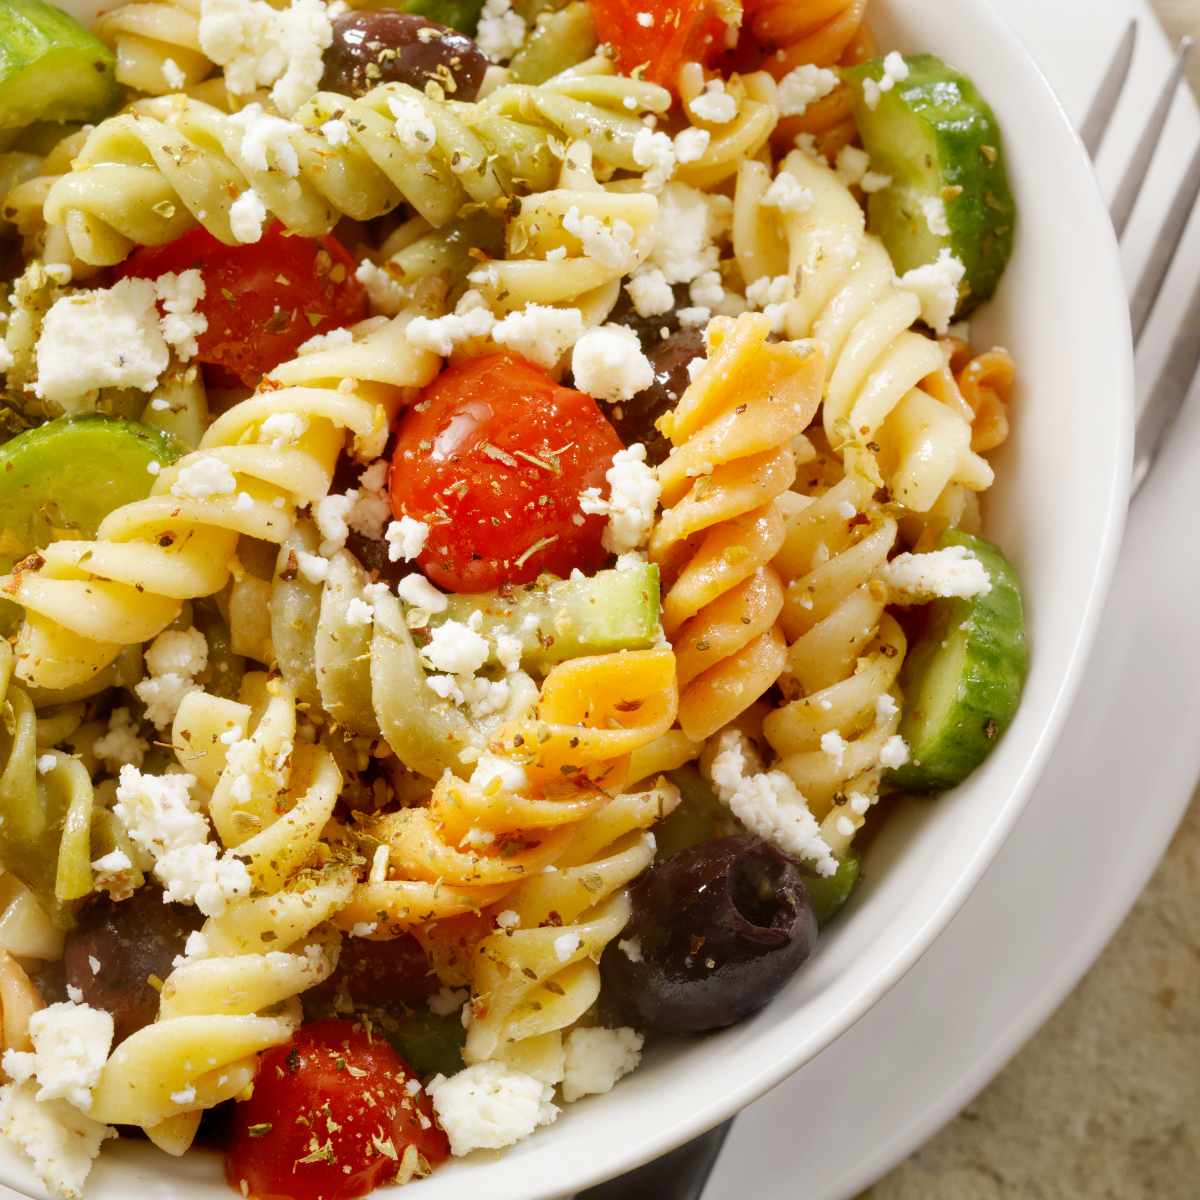 asiago pasta salad with tomatoes, olives, and cucumbers